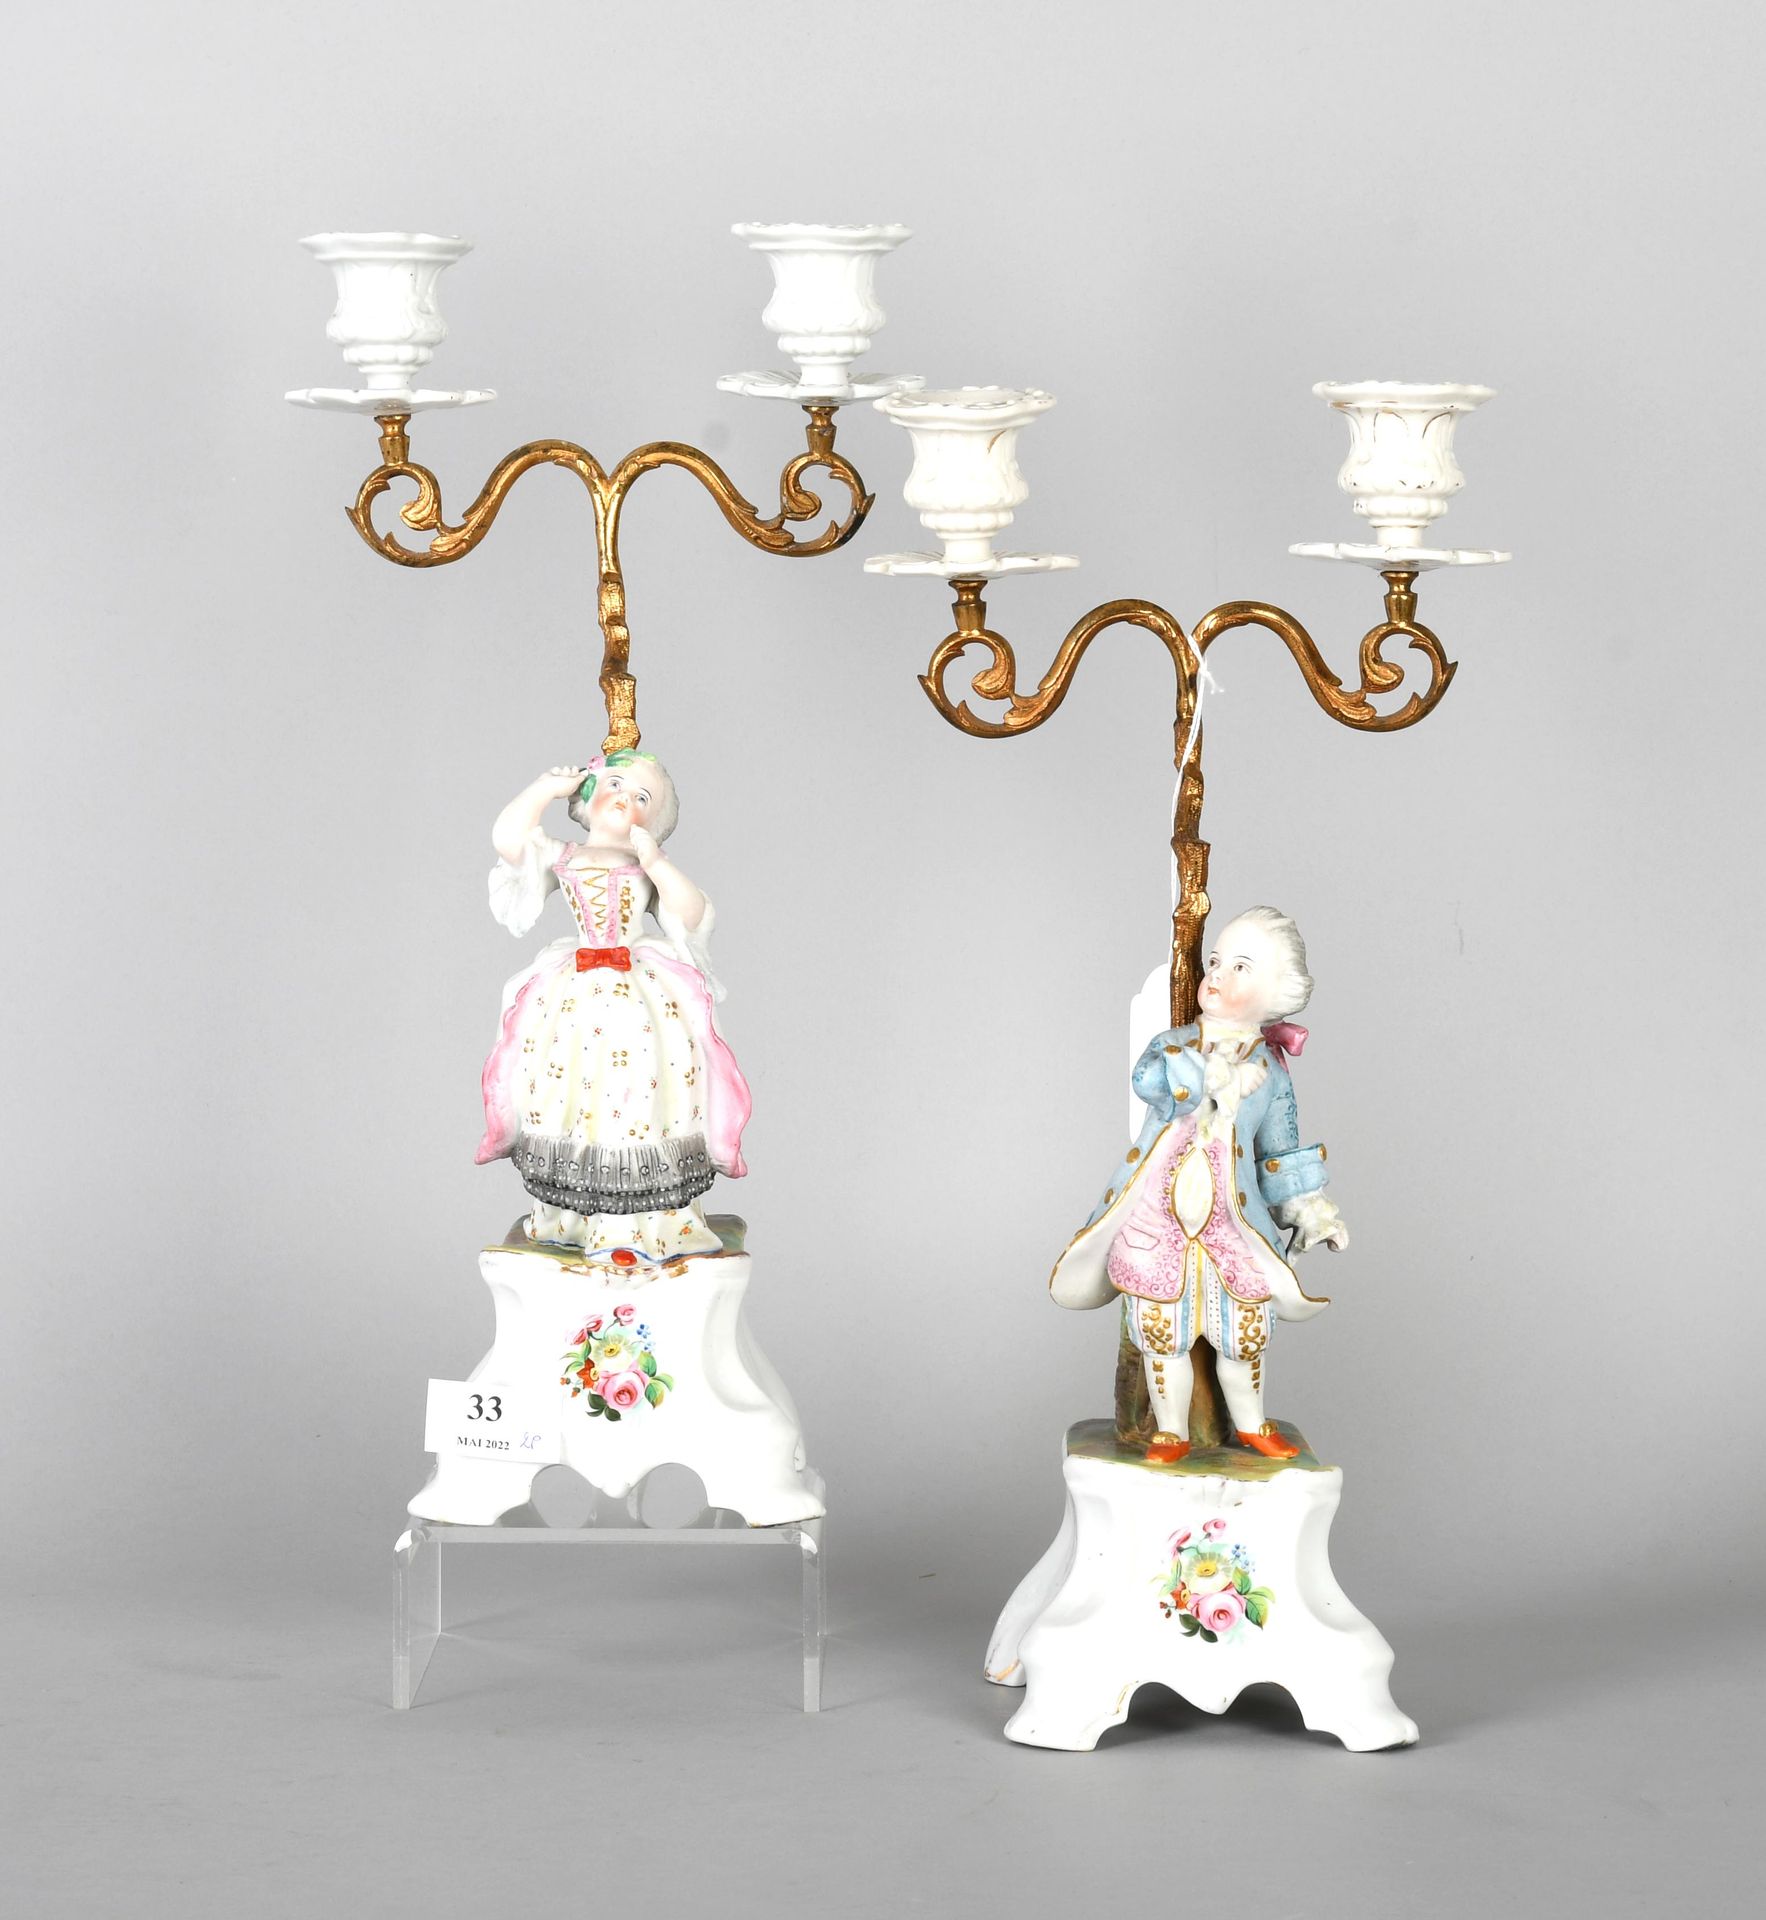 Null Andenne, 19th century

Pair of candelabras with two arms, in polychrome coo&hellip;